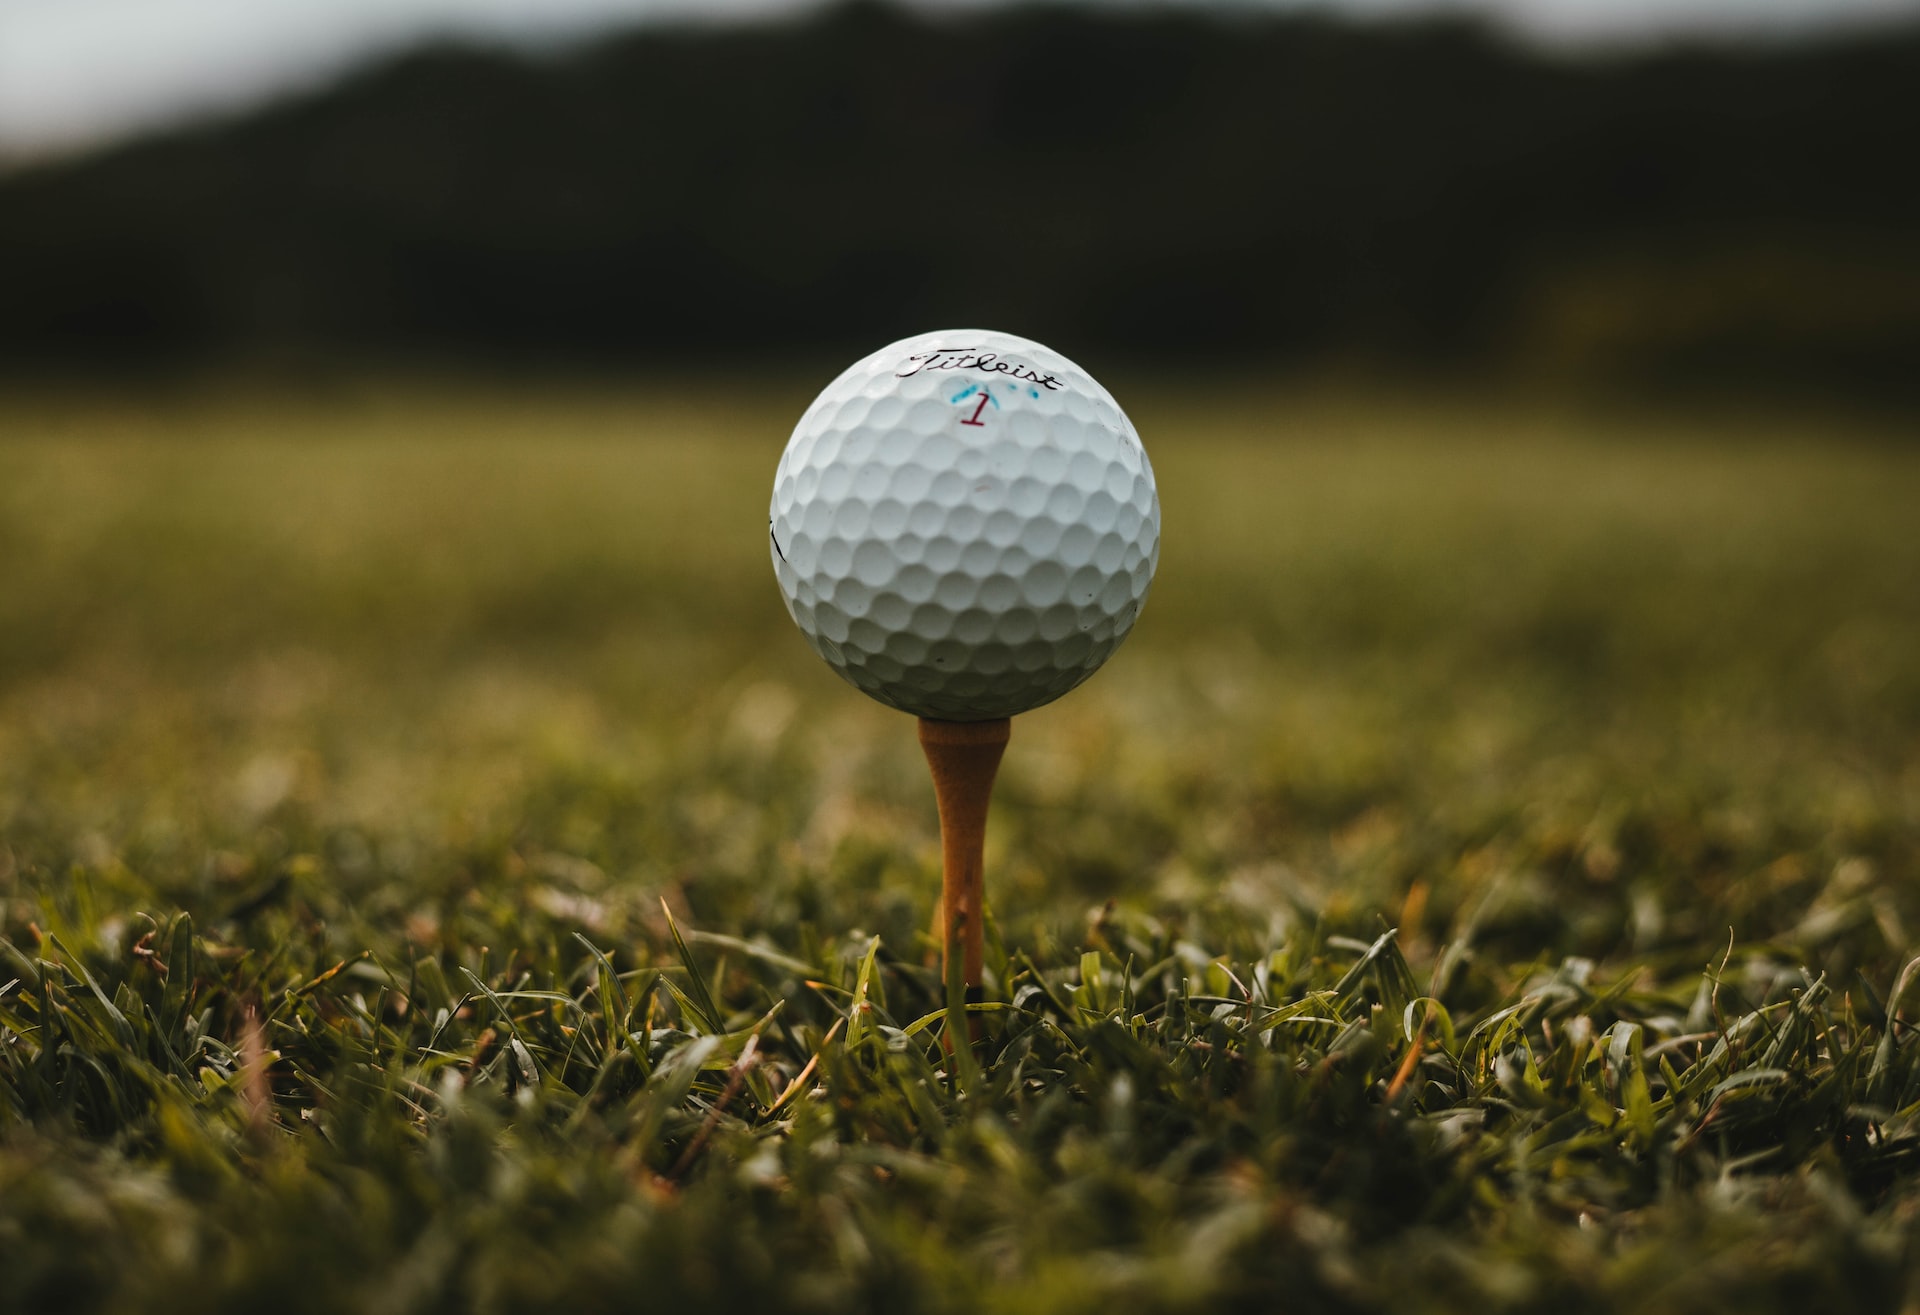 What Do The Numbers On the Golf Ball Mean? | Konnectgolf